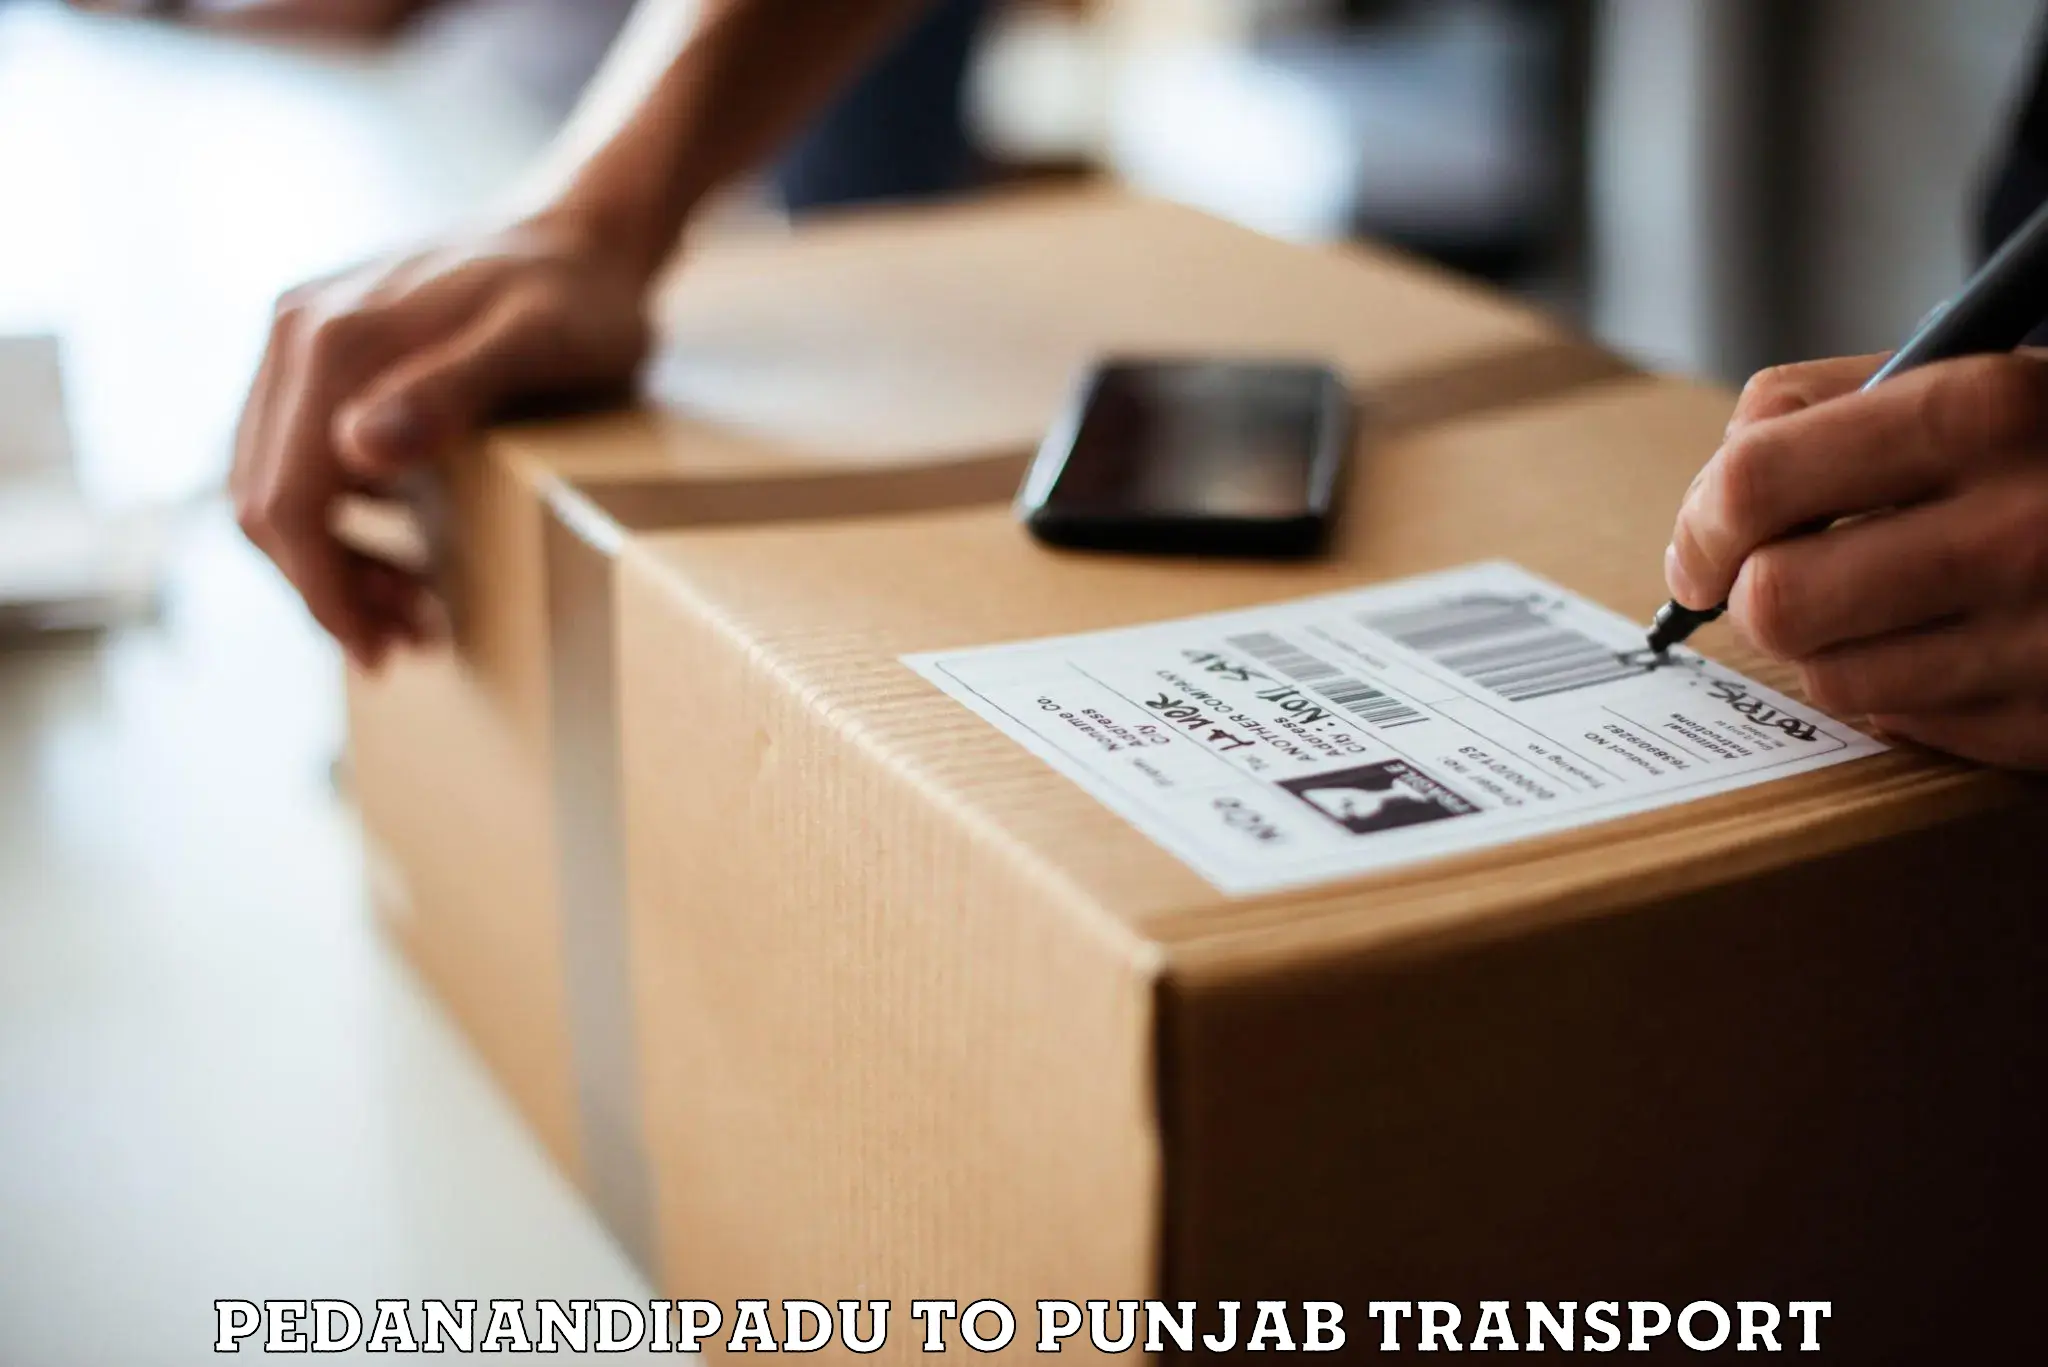 Transport bike from one state to another Pedanandipadu to IIT Ropar